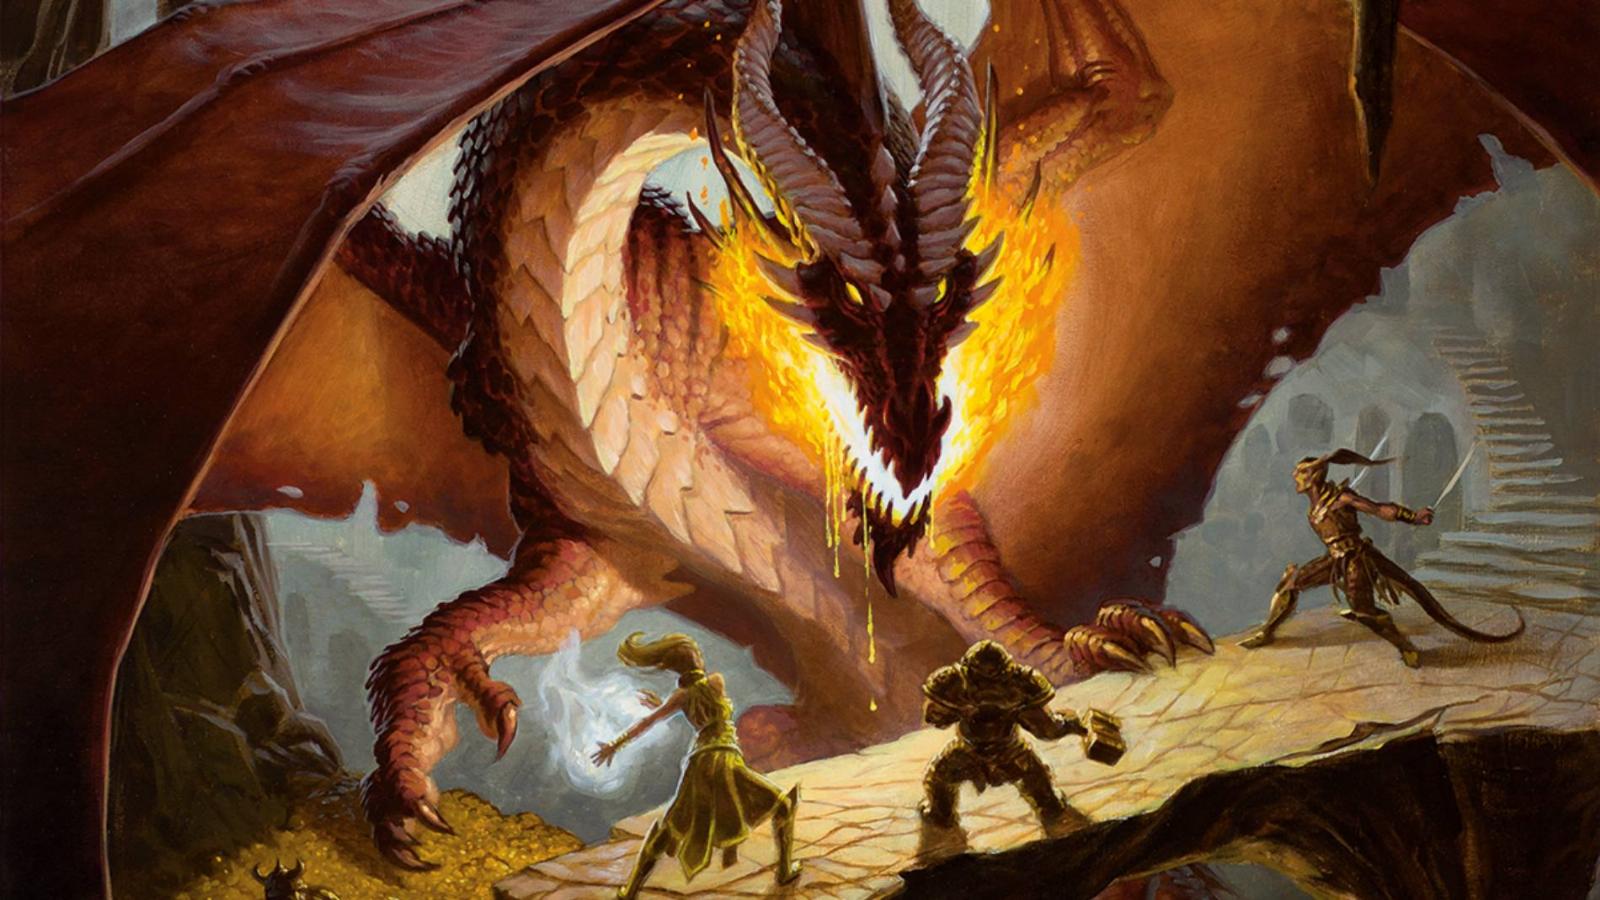 ‘We rolled a 1’: D&D publisher addresses backlash over controversial license